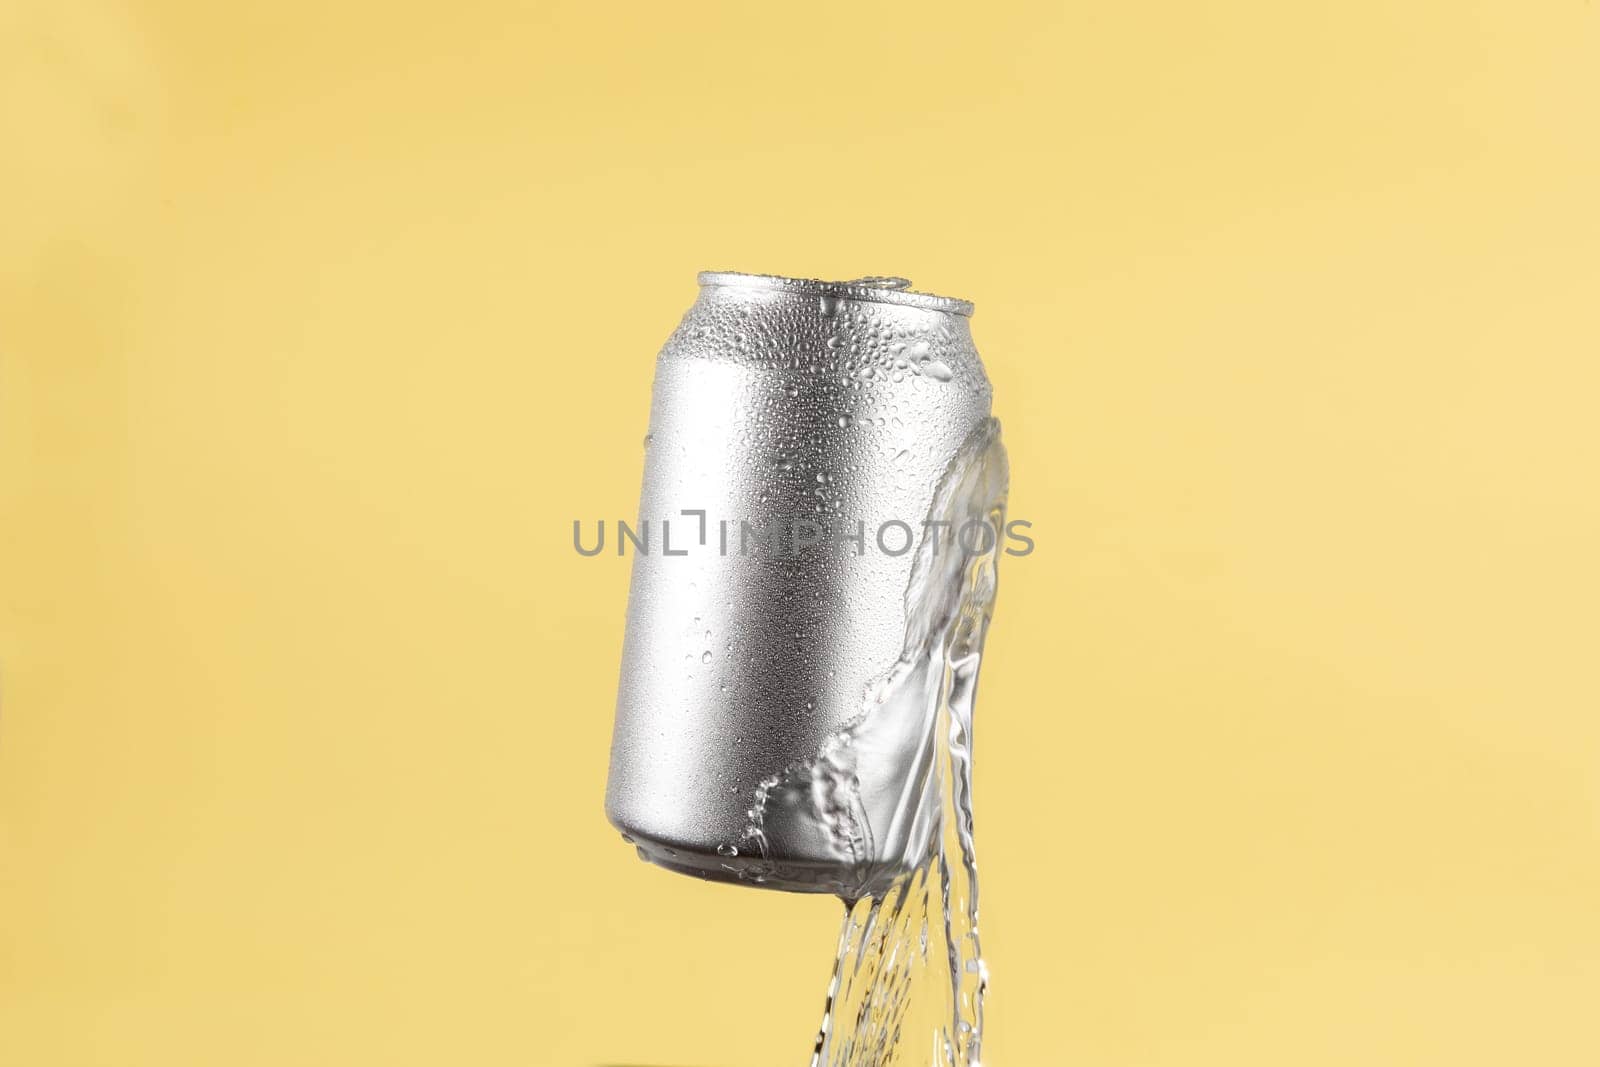 Aluminium beer or soda drinking can with water splash on light yellow background by TropicalNinjaStudio